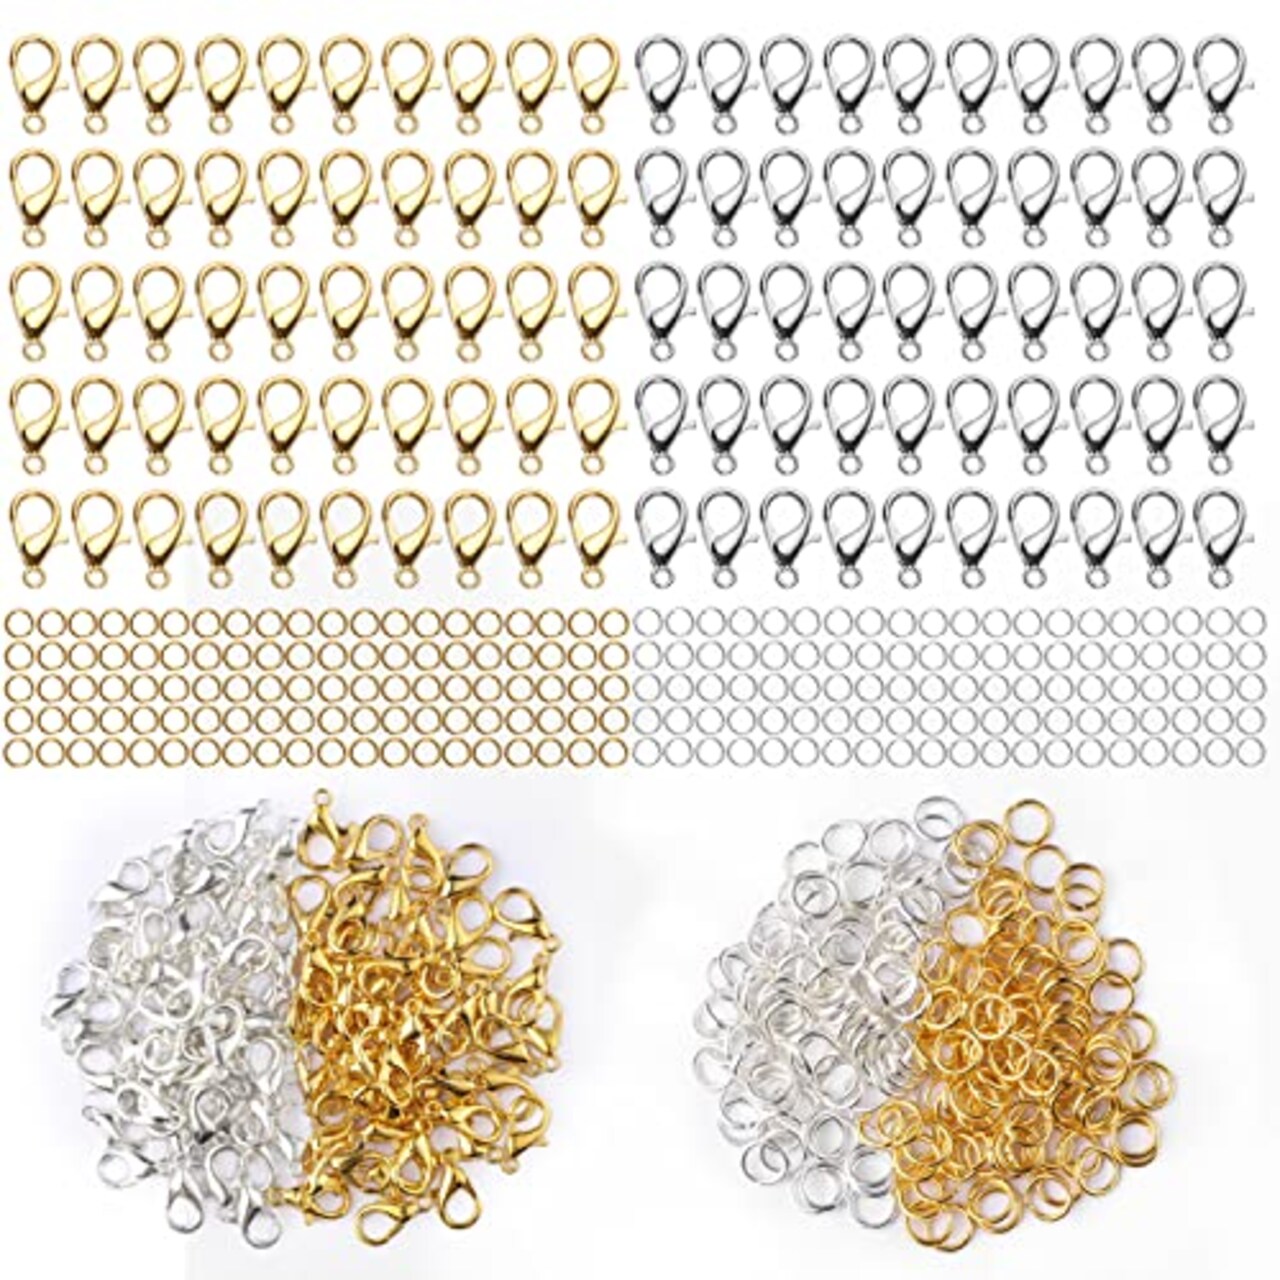 300 pcs Lobster Clasps and Open Jump Rings Set, Jewelry Clasps